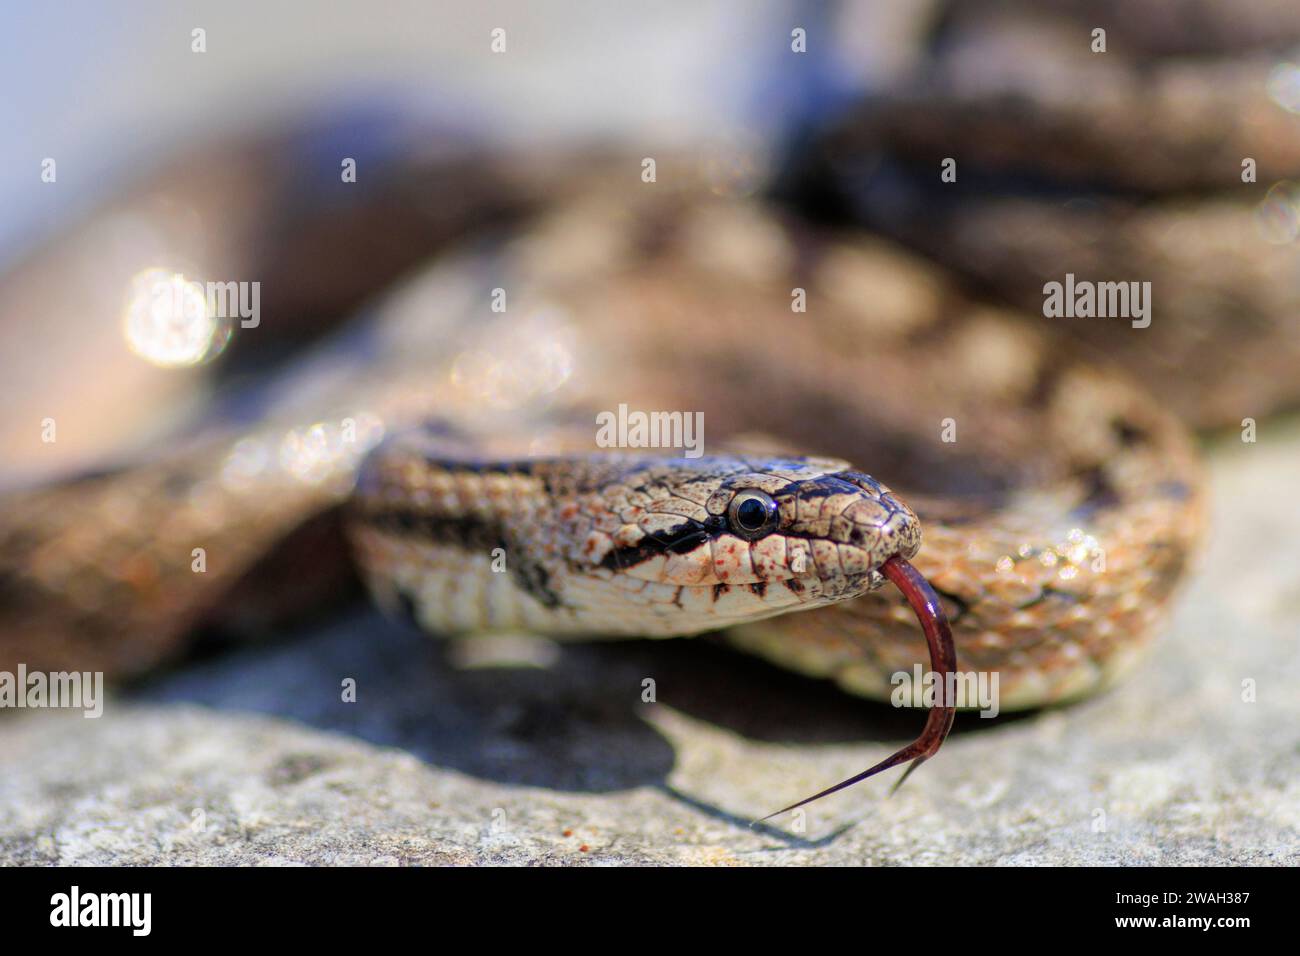 southern smooth snake, Bordeaux snake (Coronella girondica), darting its tongue in and out, portrait, France Stock Photo